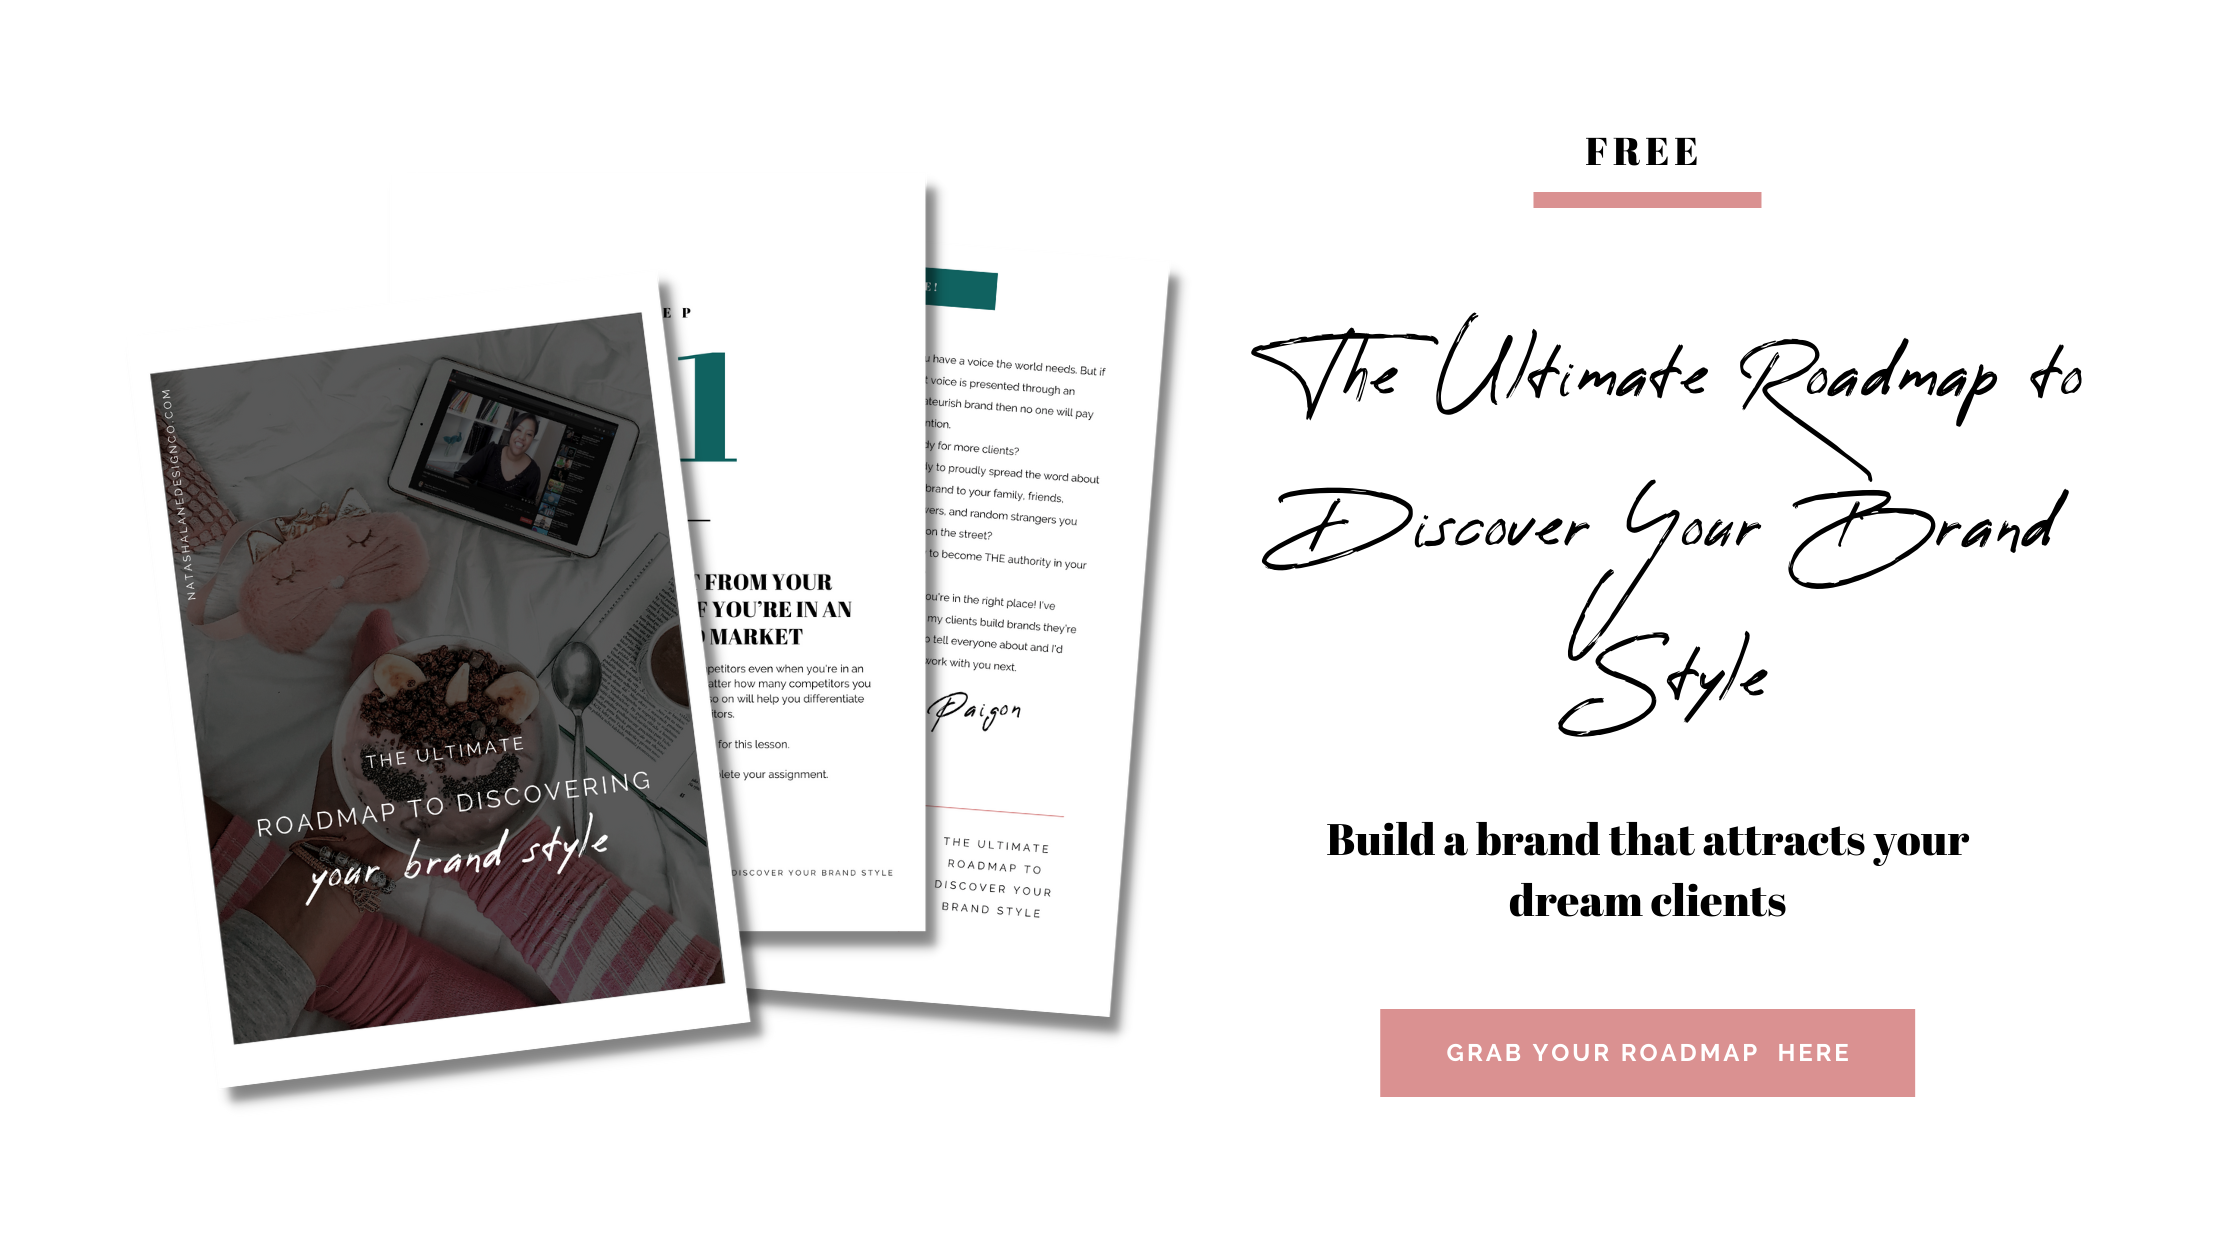 The Ultimate Roadmap to Discover Your Brand Style optin blog image